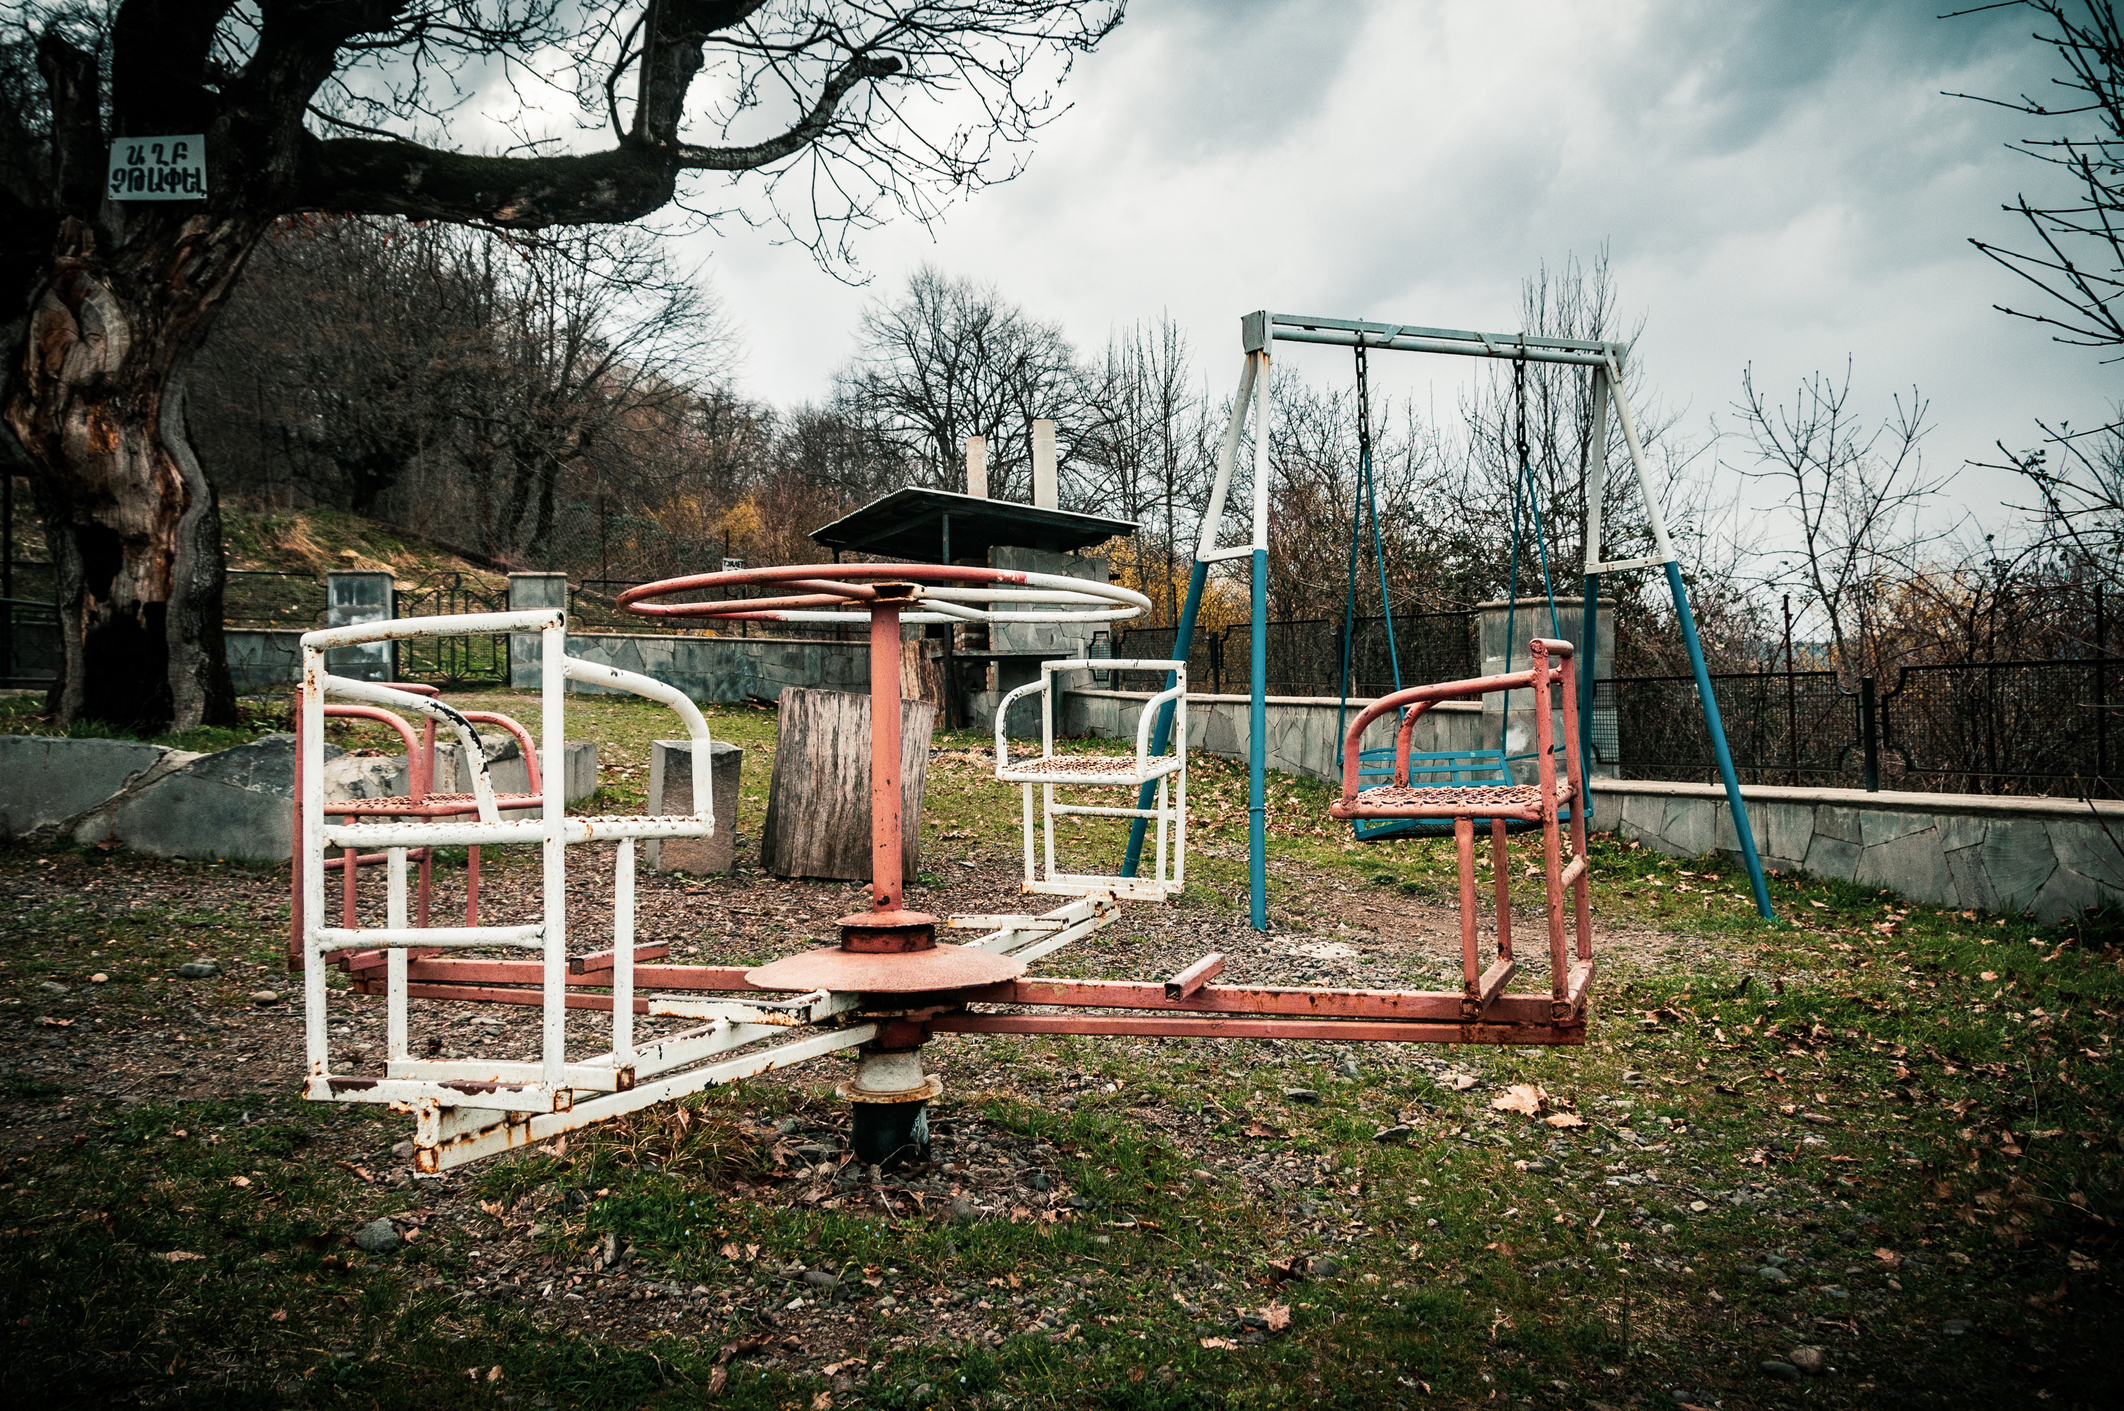 A rusty, old merry-go-round